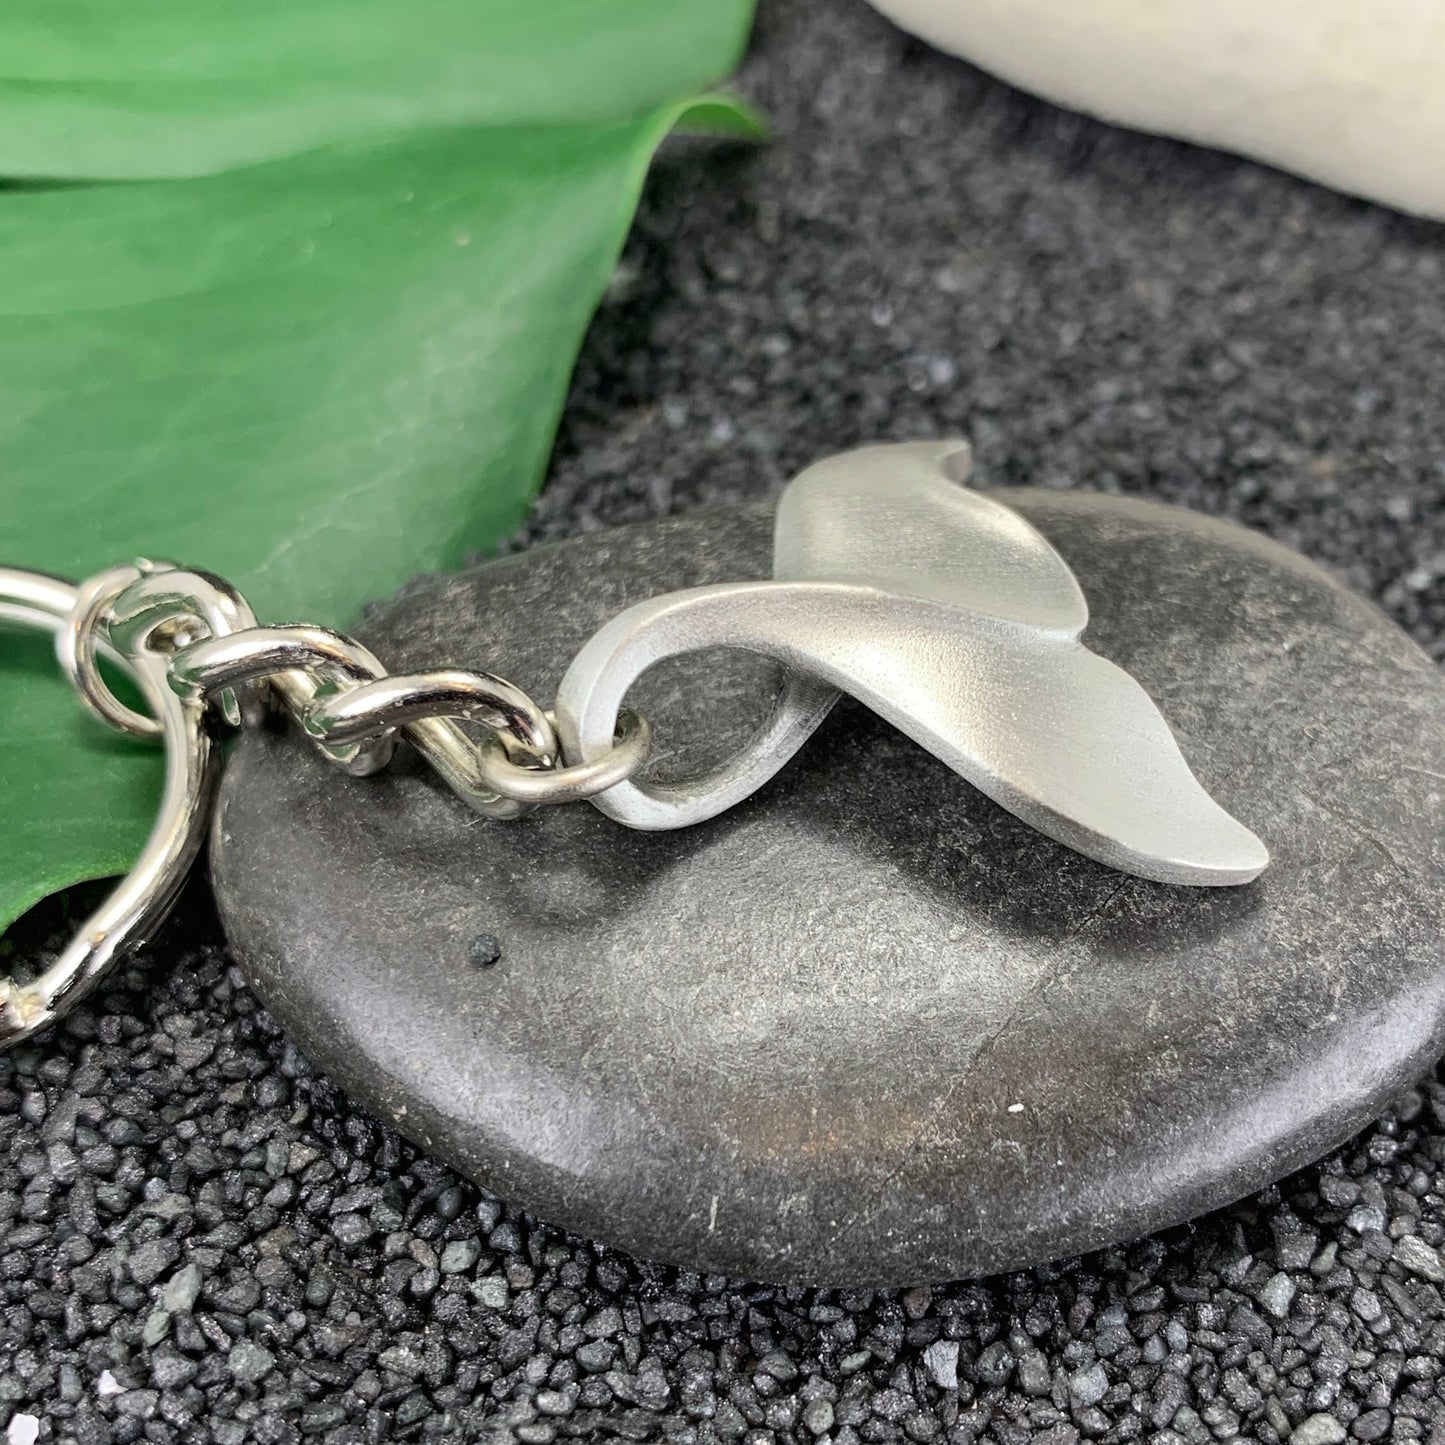 Whale Tail Keychain for Men and Women- Whale Tail Keychain Charm, Gift for Whale Watcher, Whale Fluke Keyring, Whale Tail Key Fob, Sea Life Keychain - The Tool Store